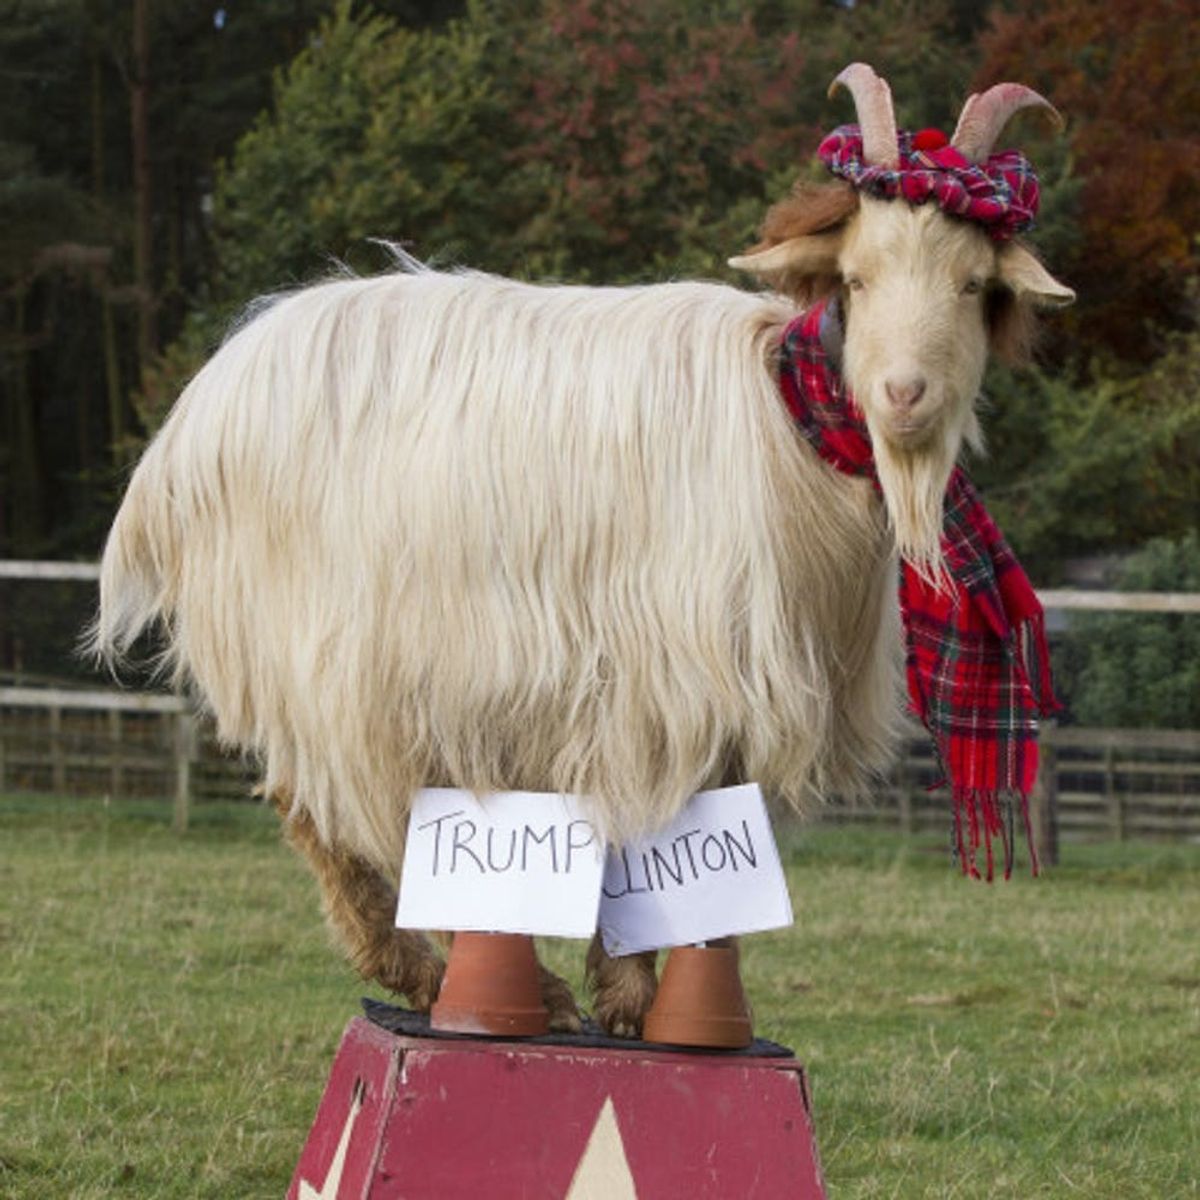 This “Psychic” Goat Has Predicted Who Will Win the Election